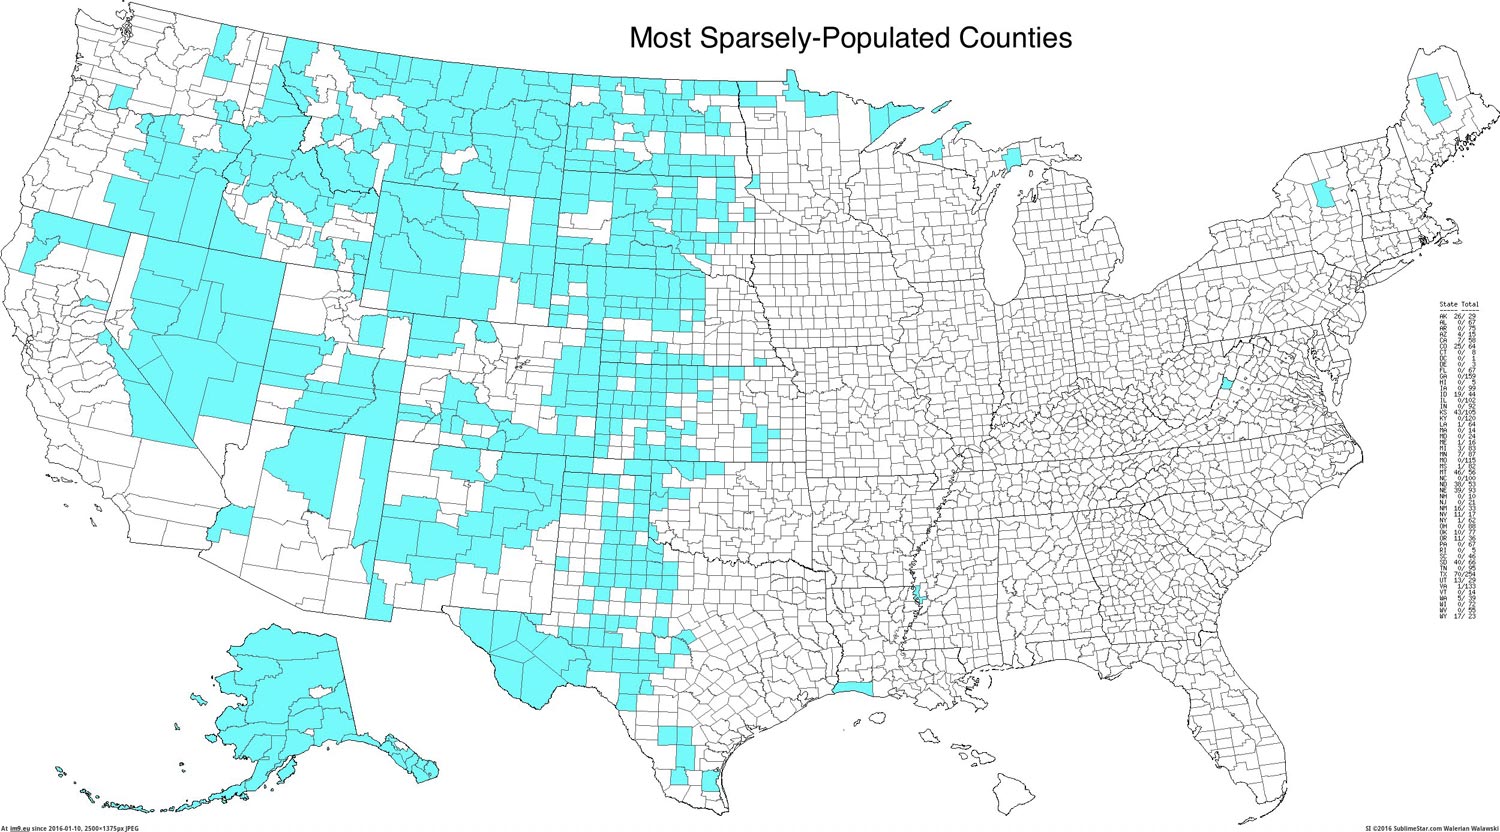 Montana is home to more sparsely populated counties than any other state